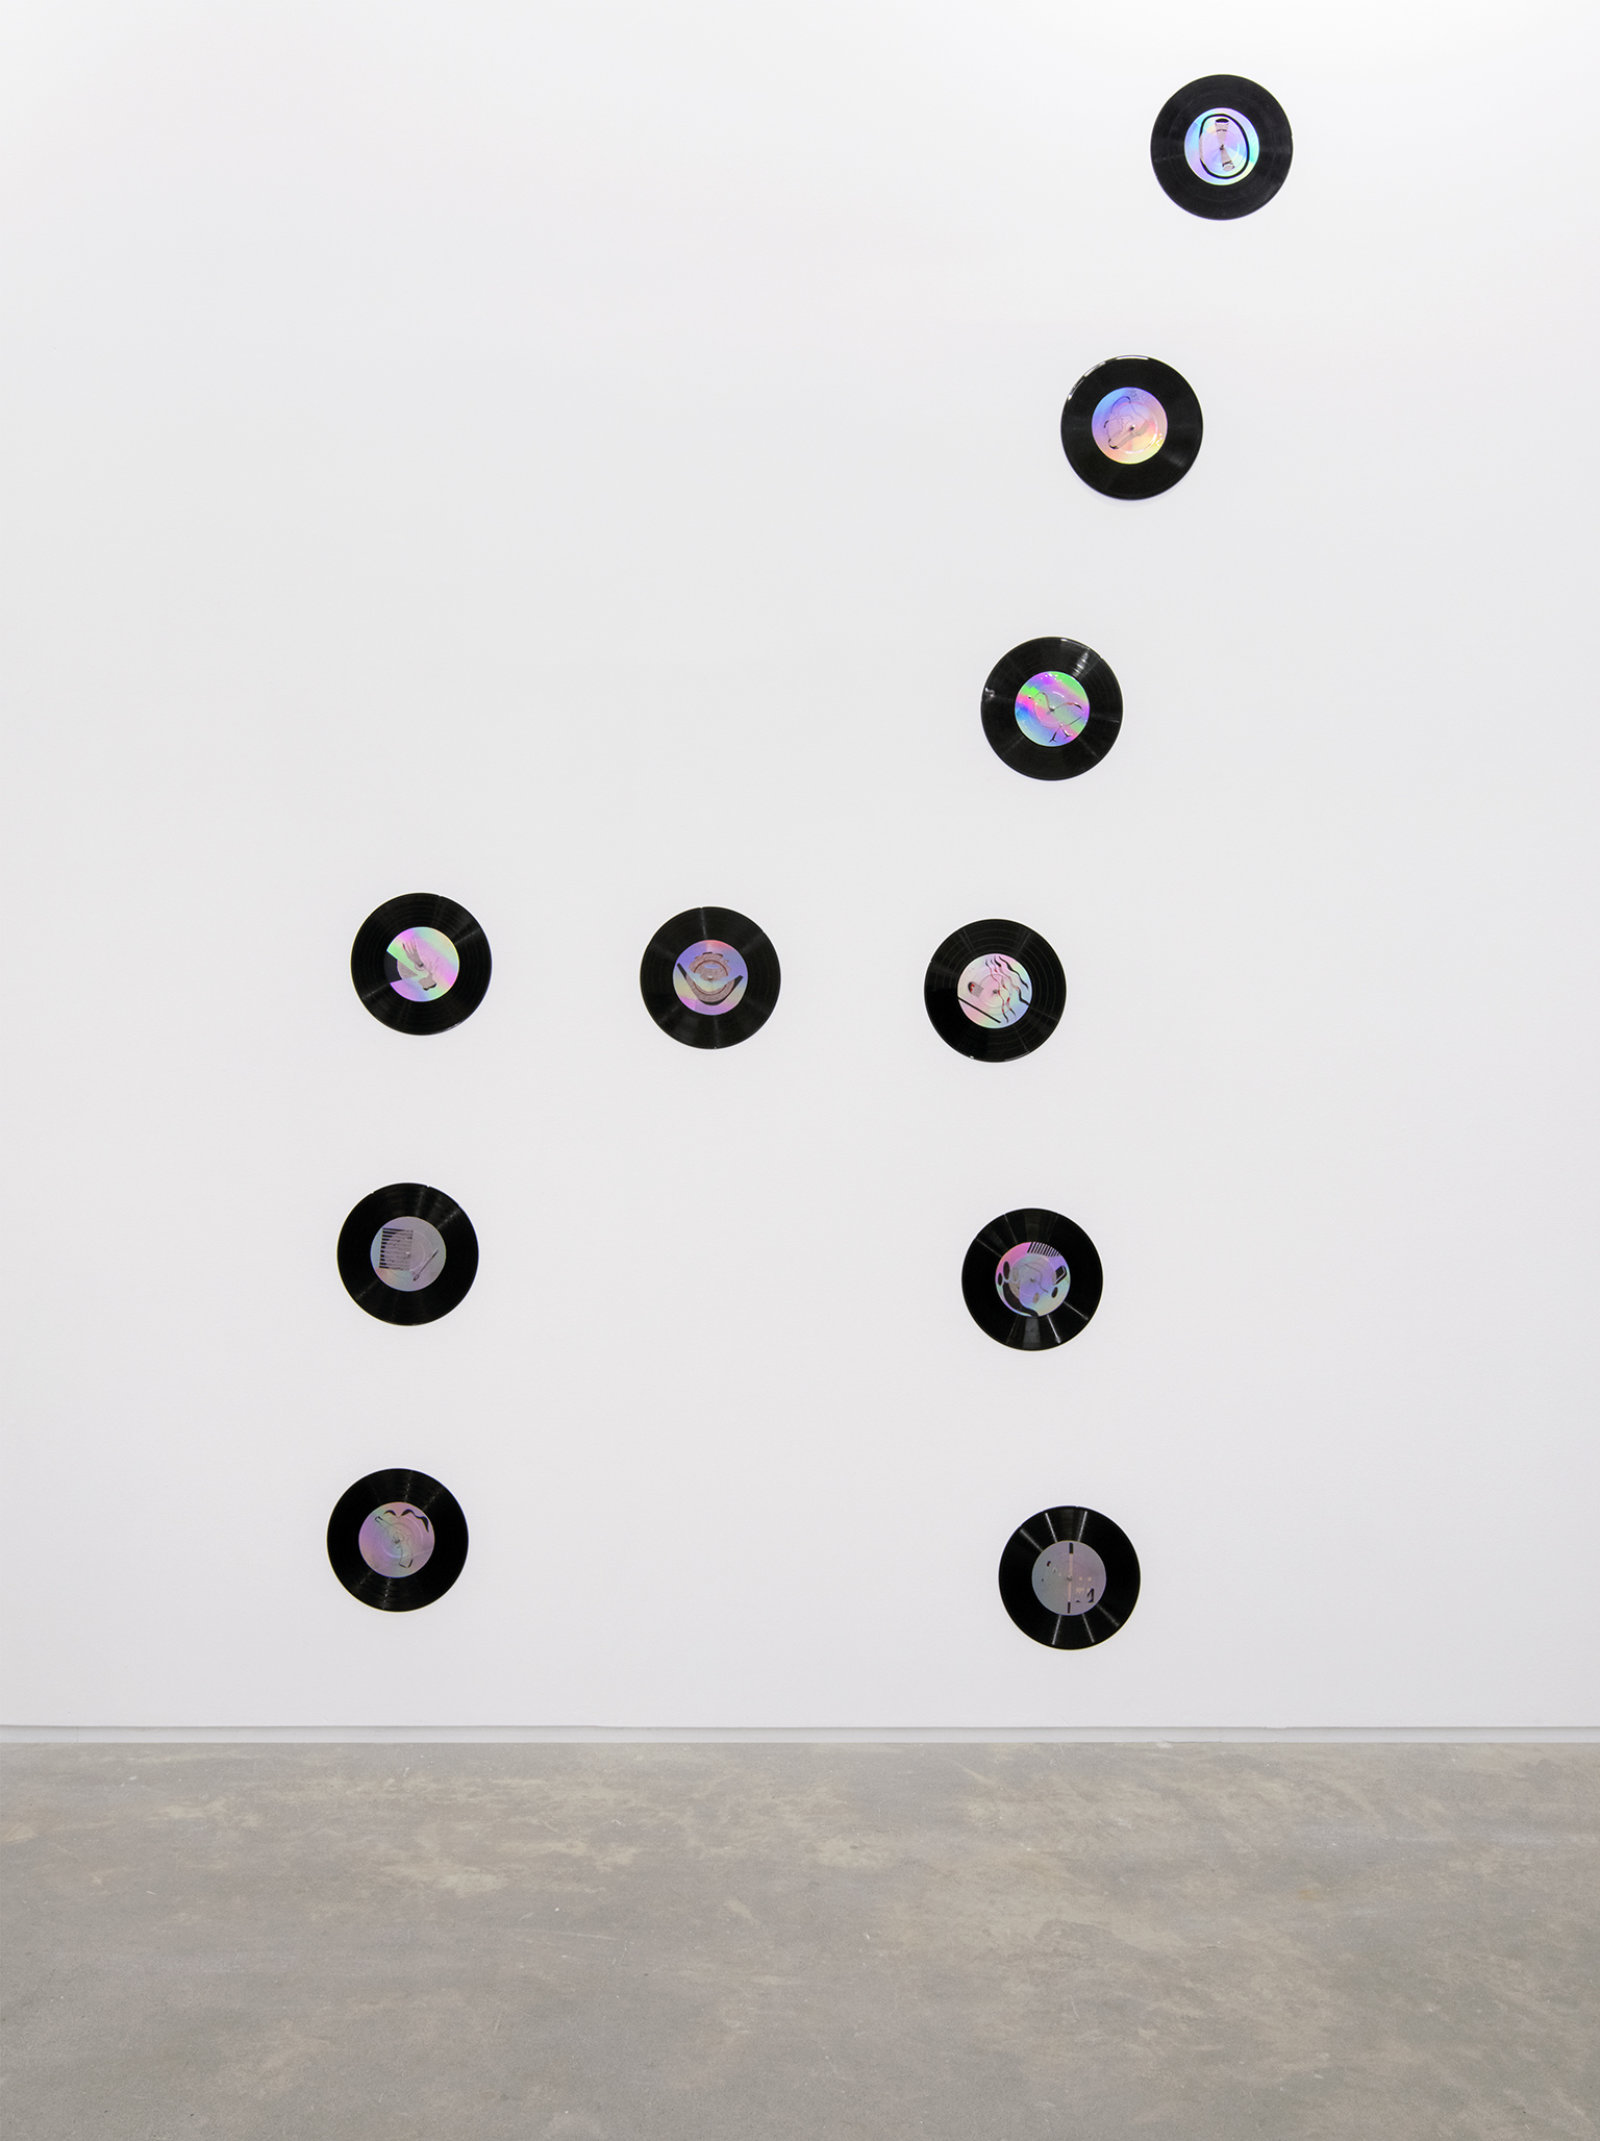 Jerry Pethick, Kolossus of Kindergarden (detail), 1987–1989, spectra-foil on records, aluminium, blown glass, wood, rock, tires, cargo blanket, dimensions variable